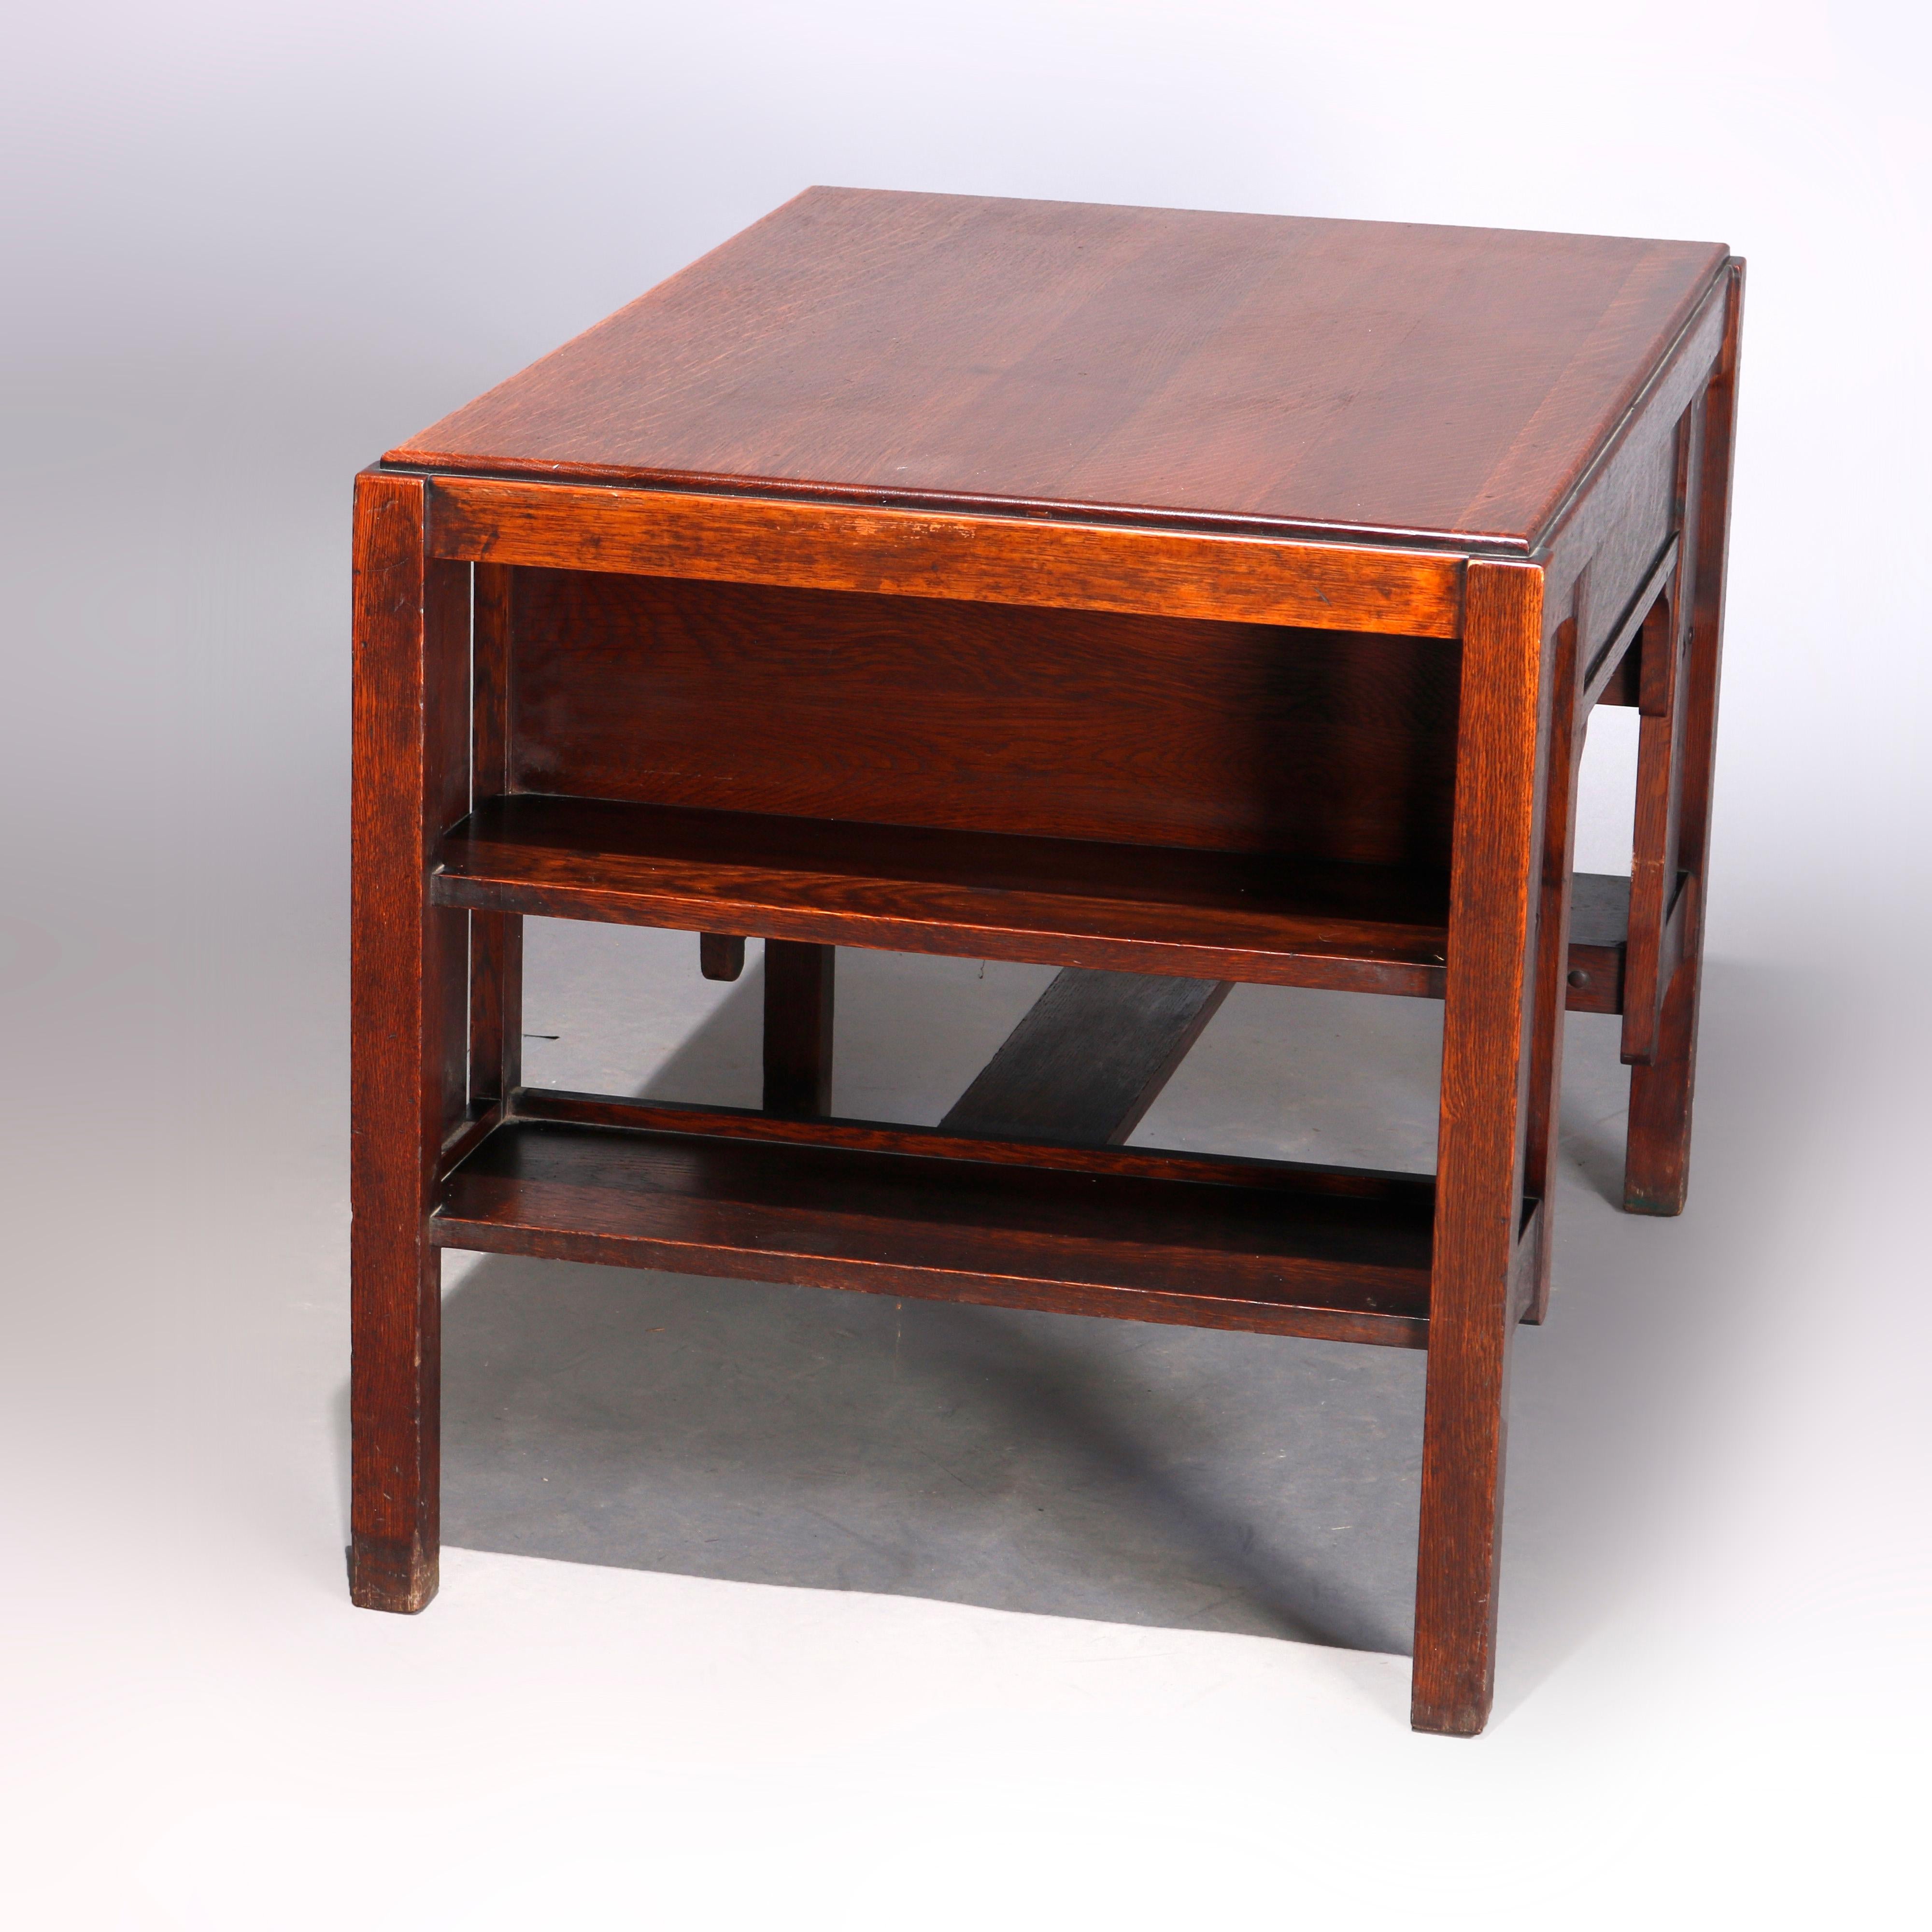 Arts and Crafts Antique Arts & Crafts Mission Oak Desk, Library Table, by Limbert, circa 1910